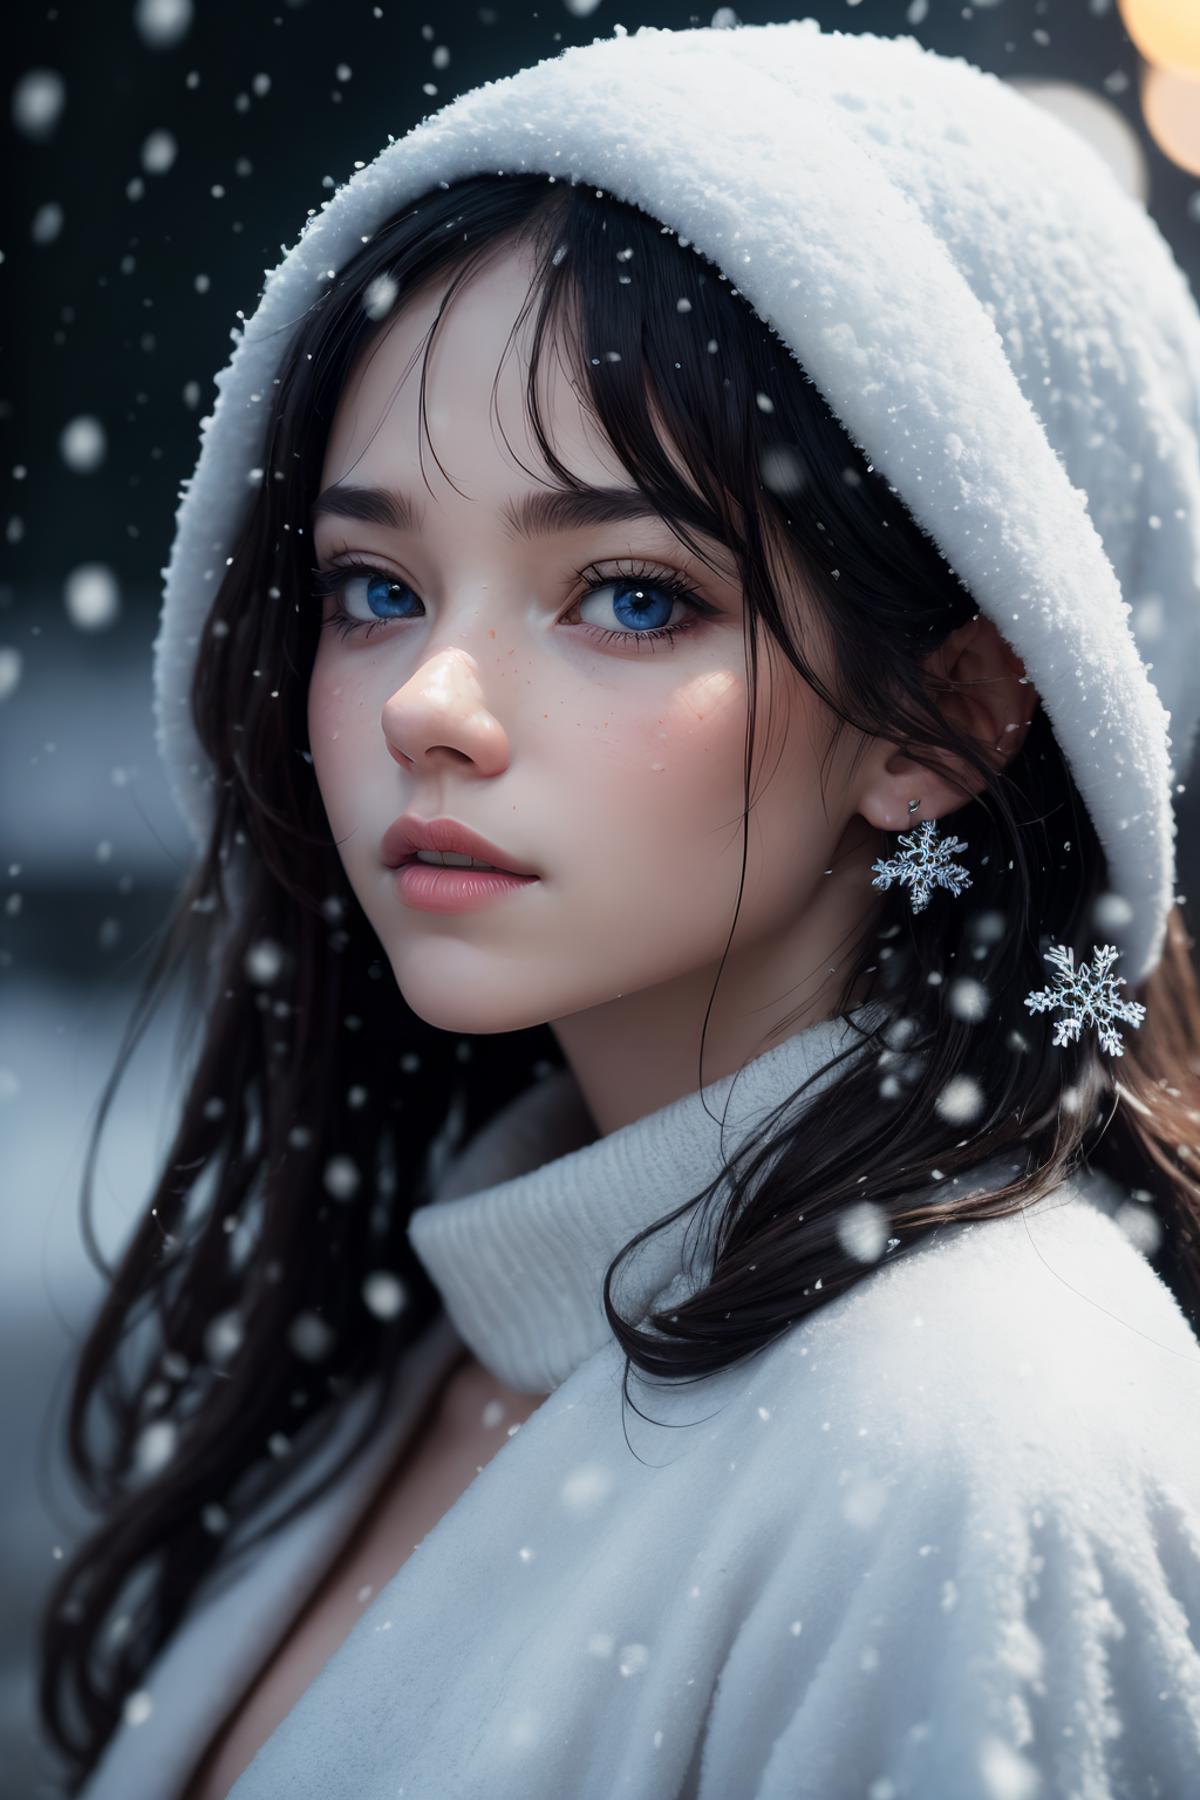 Snowflakes and snow | Concept magic image by LahIntheFutureland